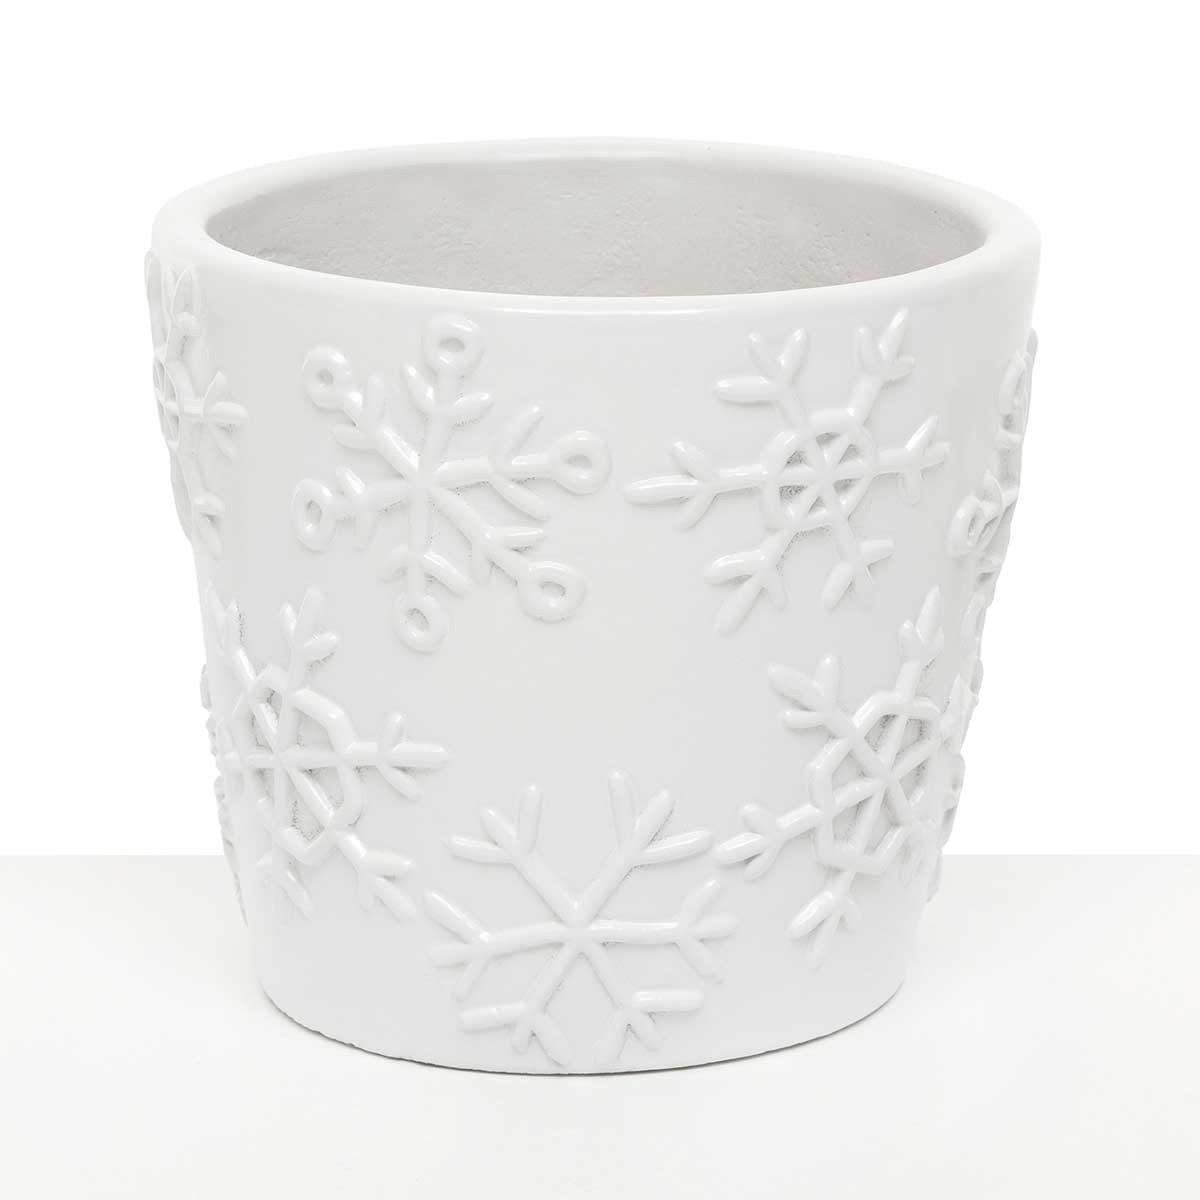 POT SNOWFLAKE LARGE 5.5IN X 5IN WHITE